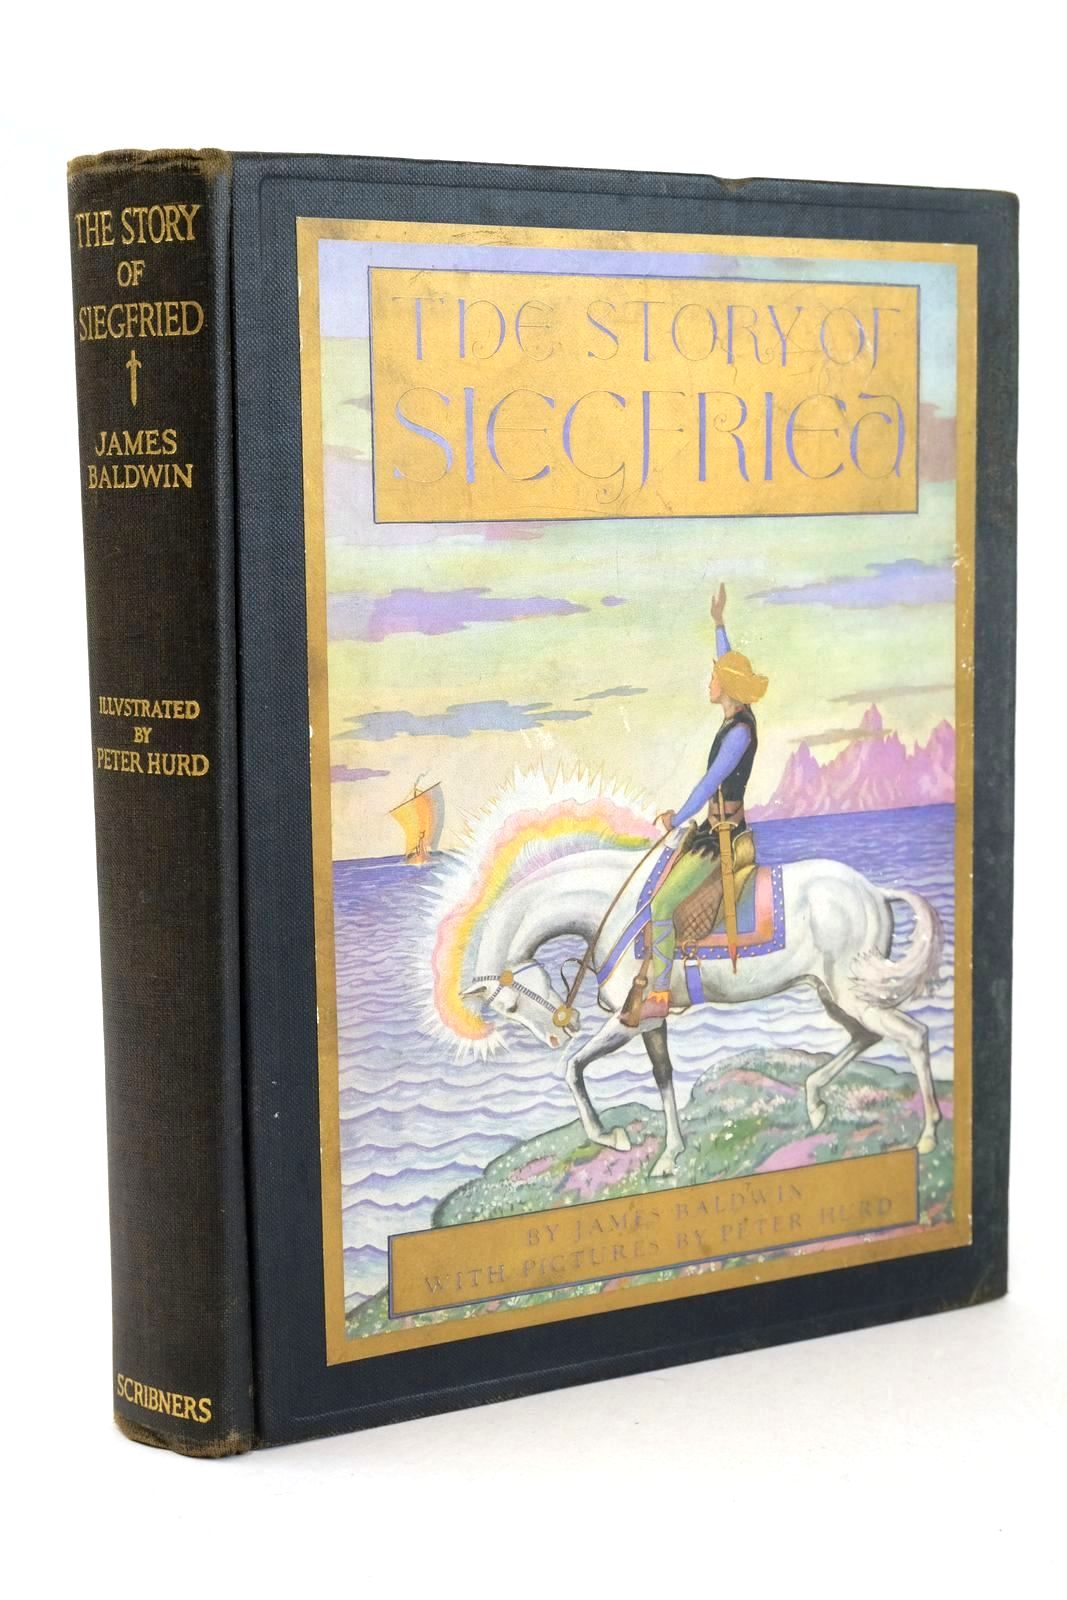 Photo of THE STORY OF SIEGFRIED written by Baldwin, James illustrated by Hurd, Peter published by Charles Scribner's Sons (STOCK CODE: 1326250)  for sale by Stella & Rose's Books